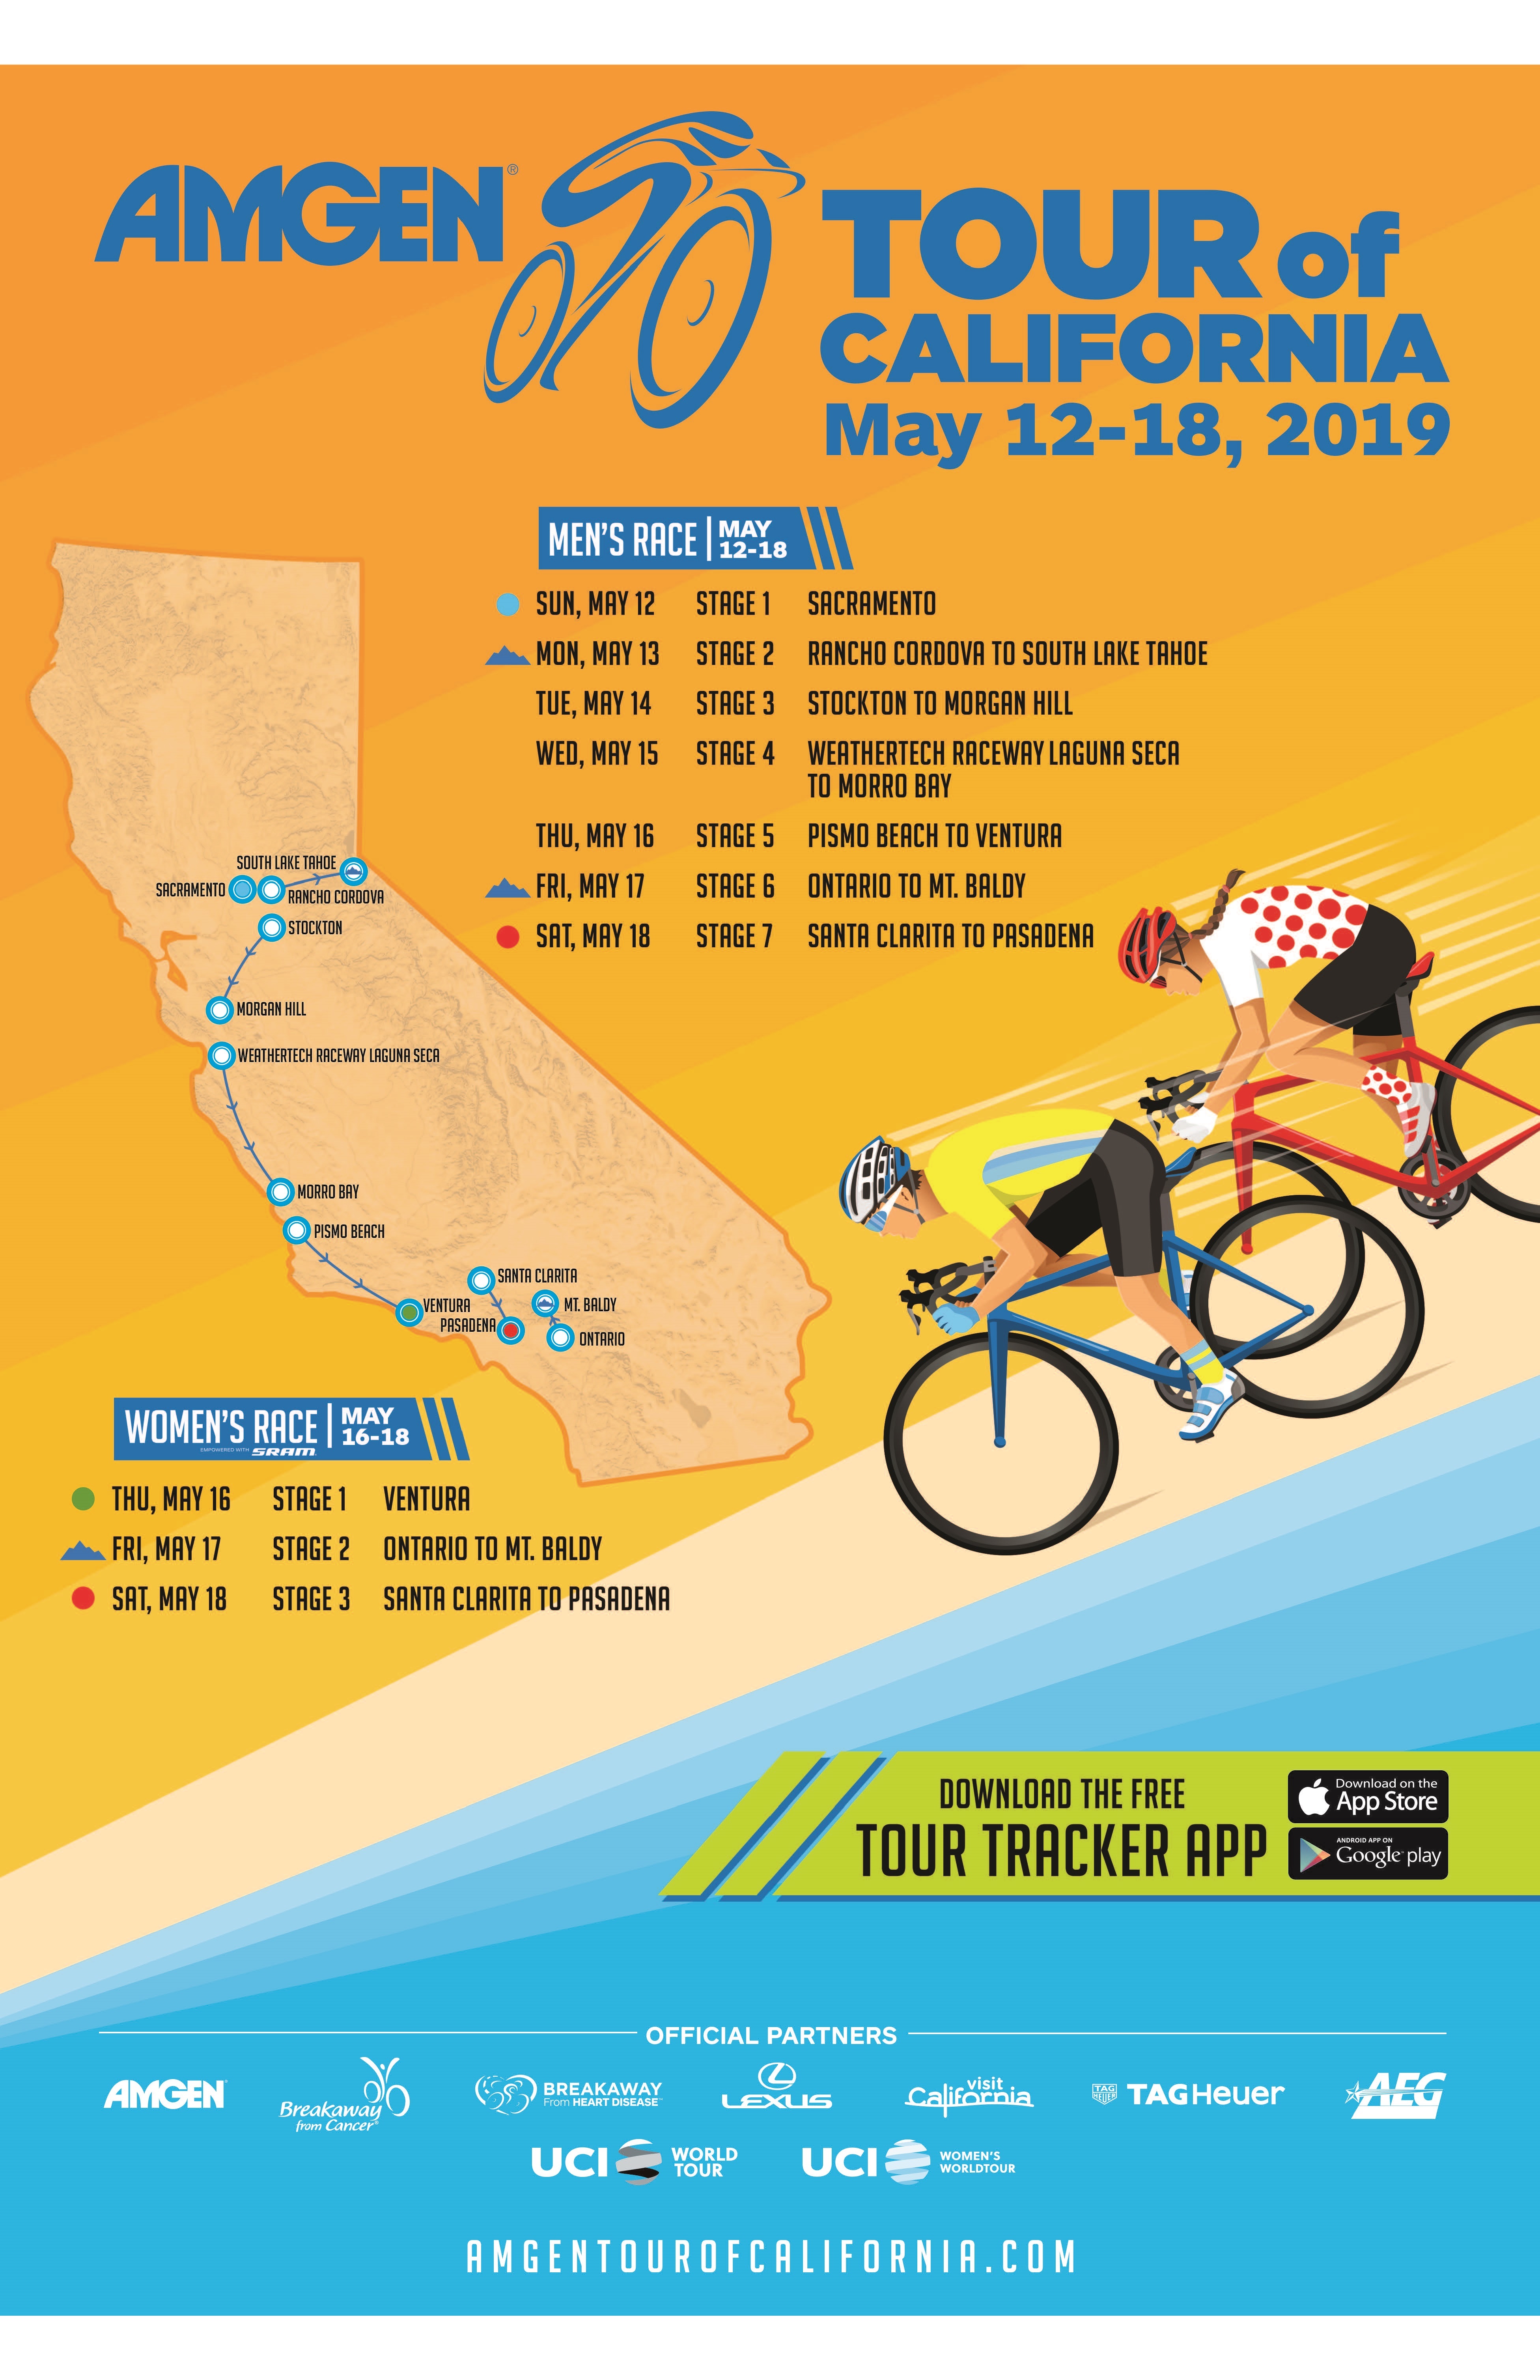 Amgen Tour of California 2019 Host Cities and Race Schedule Revealed